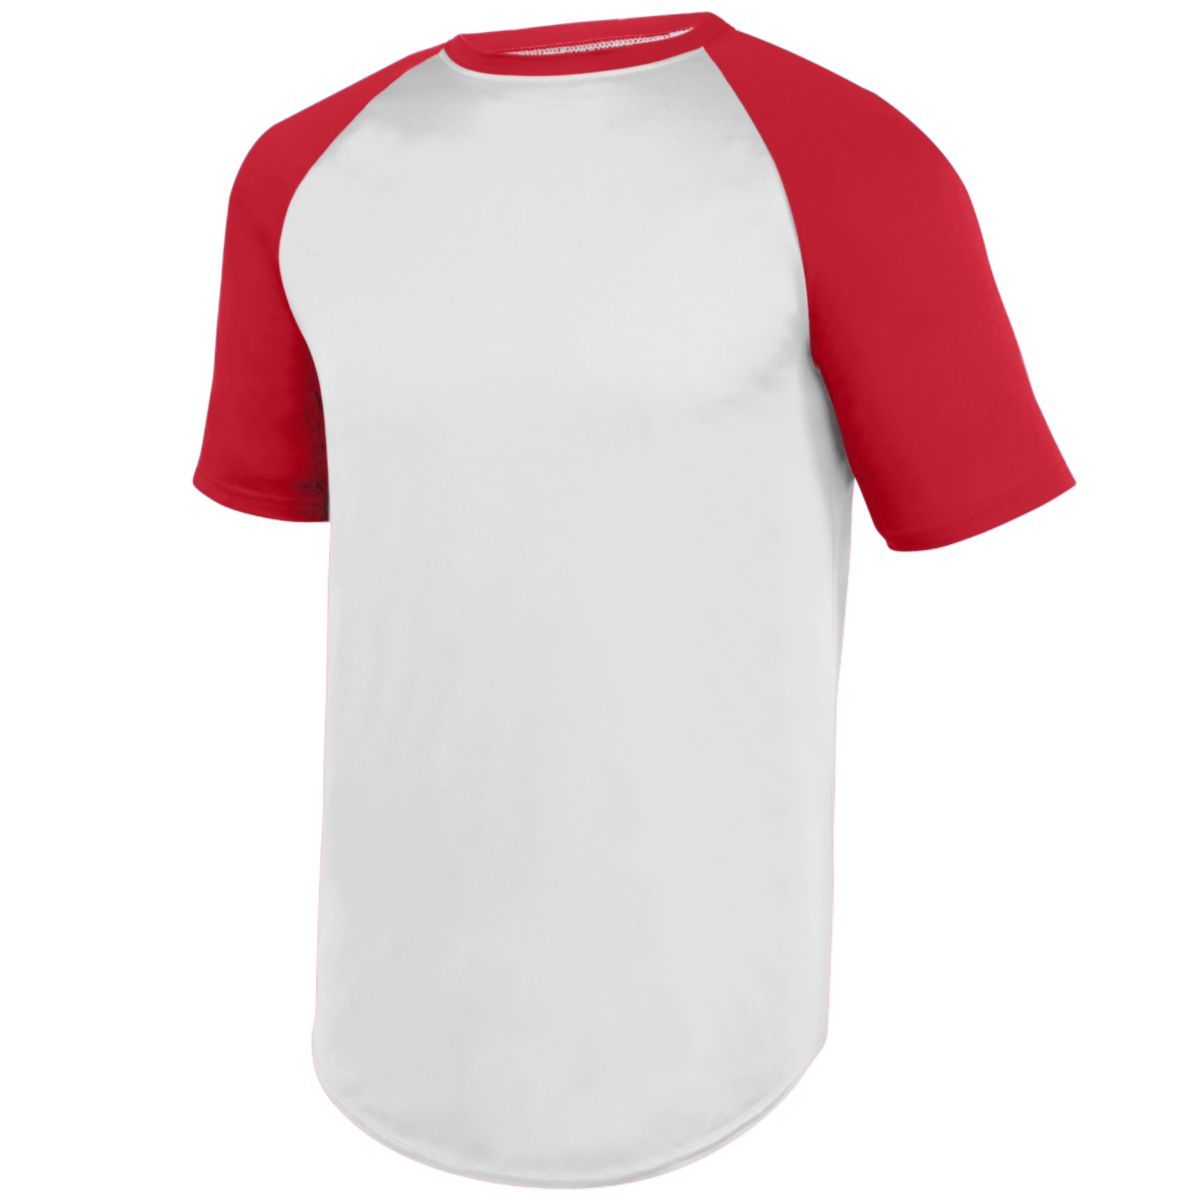 Augusta Sportswear Wicking Short Sleeve Baseball Jersey in White/Red  -Part of the Adult, Adult-Jersey, Augusta-Products, Baseball, Shirts, All-Sports, All-Sports-1 product lines at KanaleyCreations.com